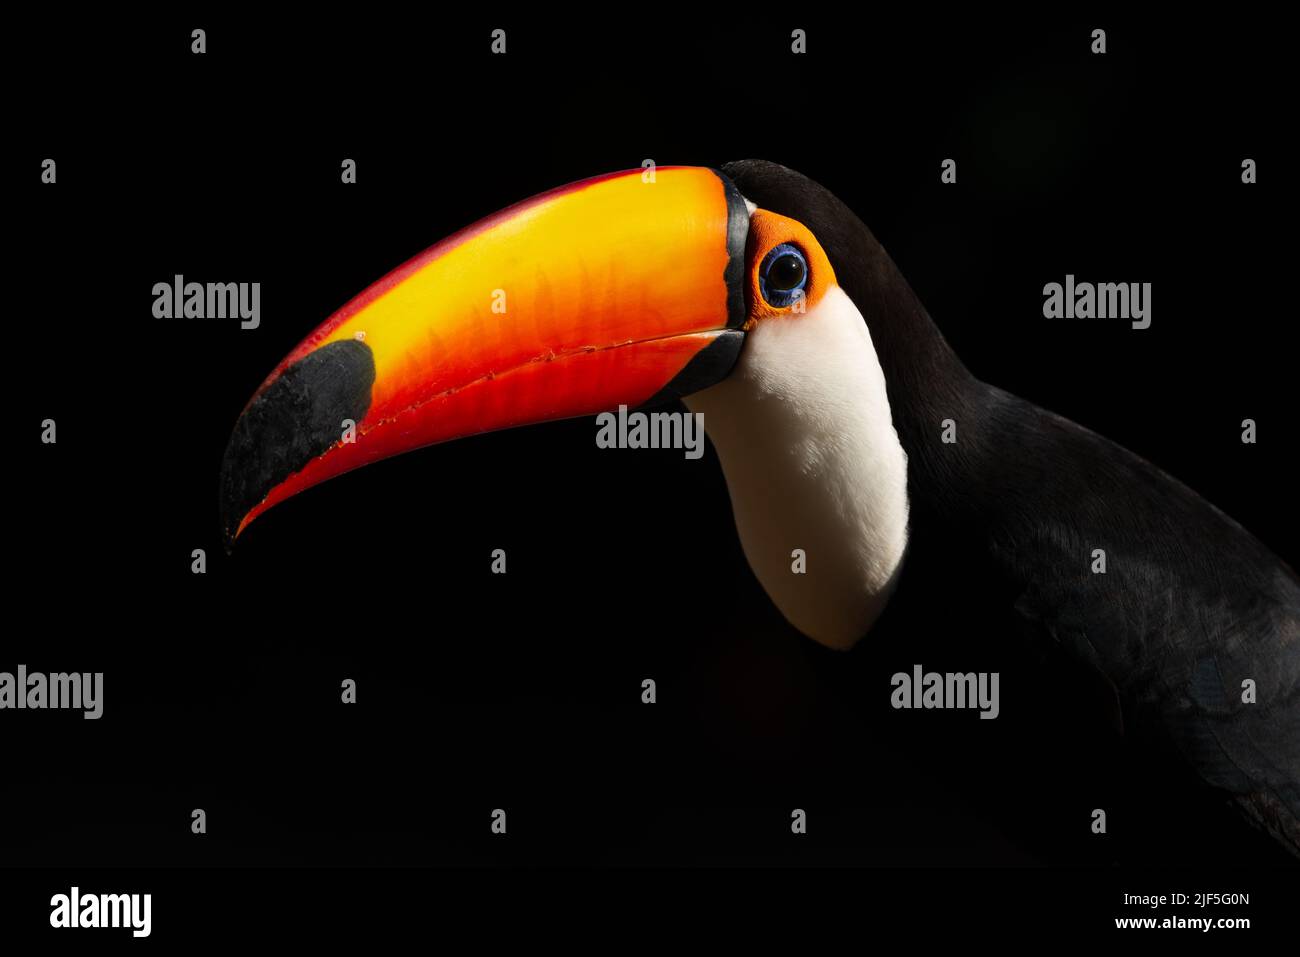 A Toco Toucan (Ramphastos toco) from Brazil Stock Photo